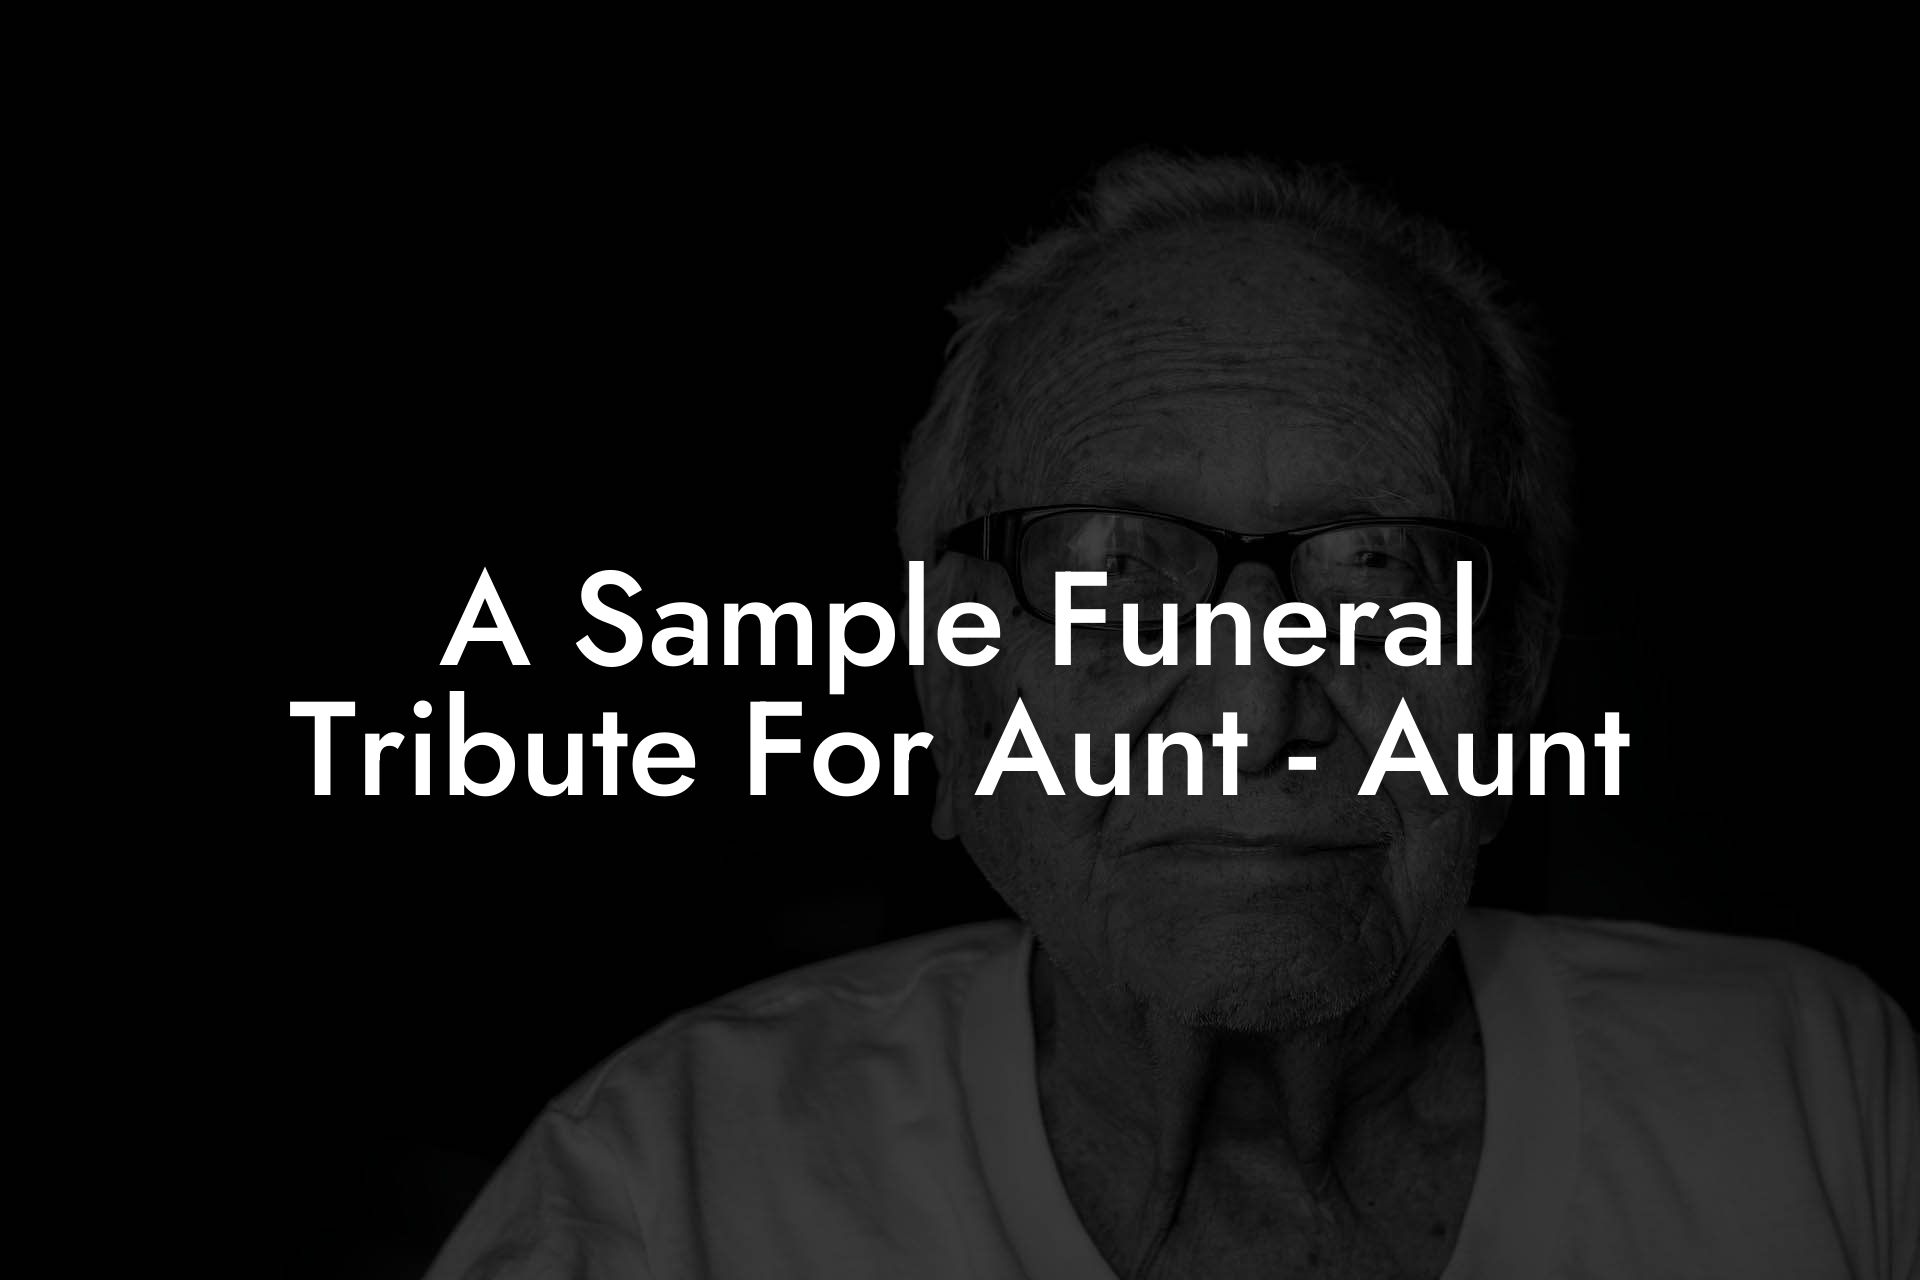 A Sample Funeral Tribute For Aunt - Aunt